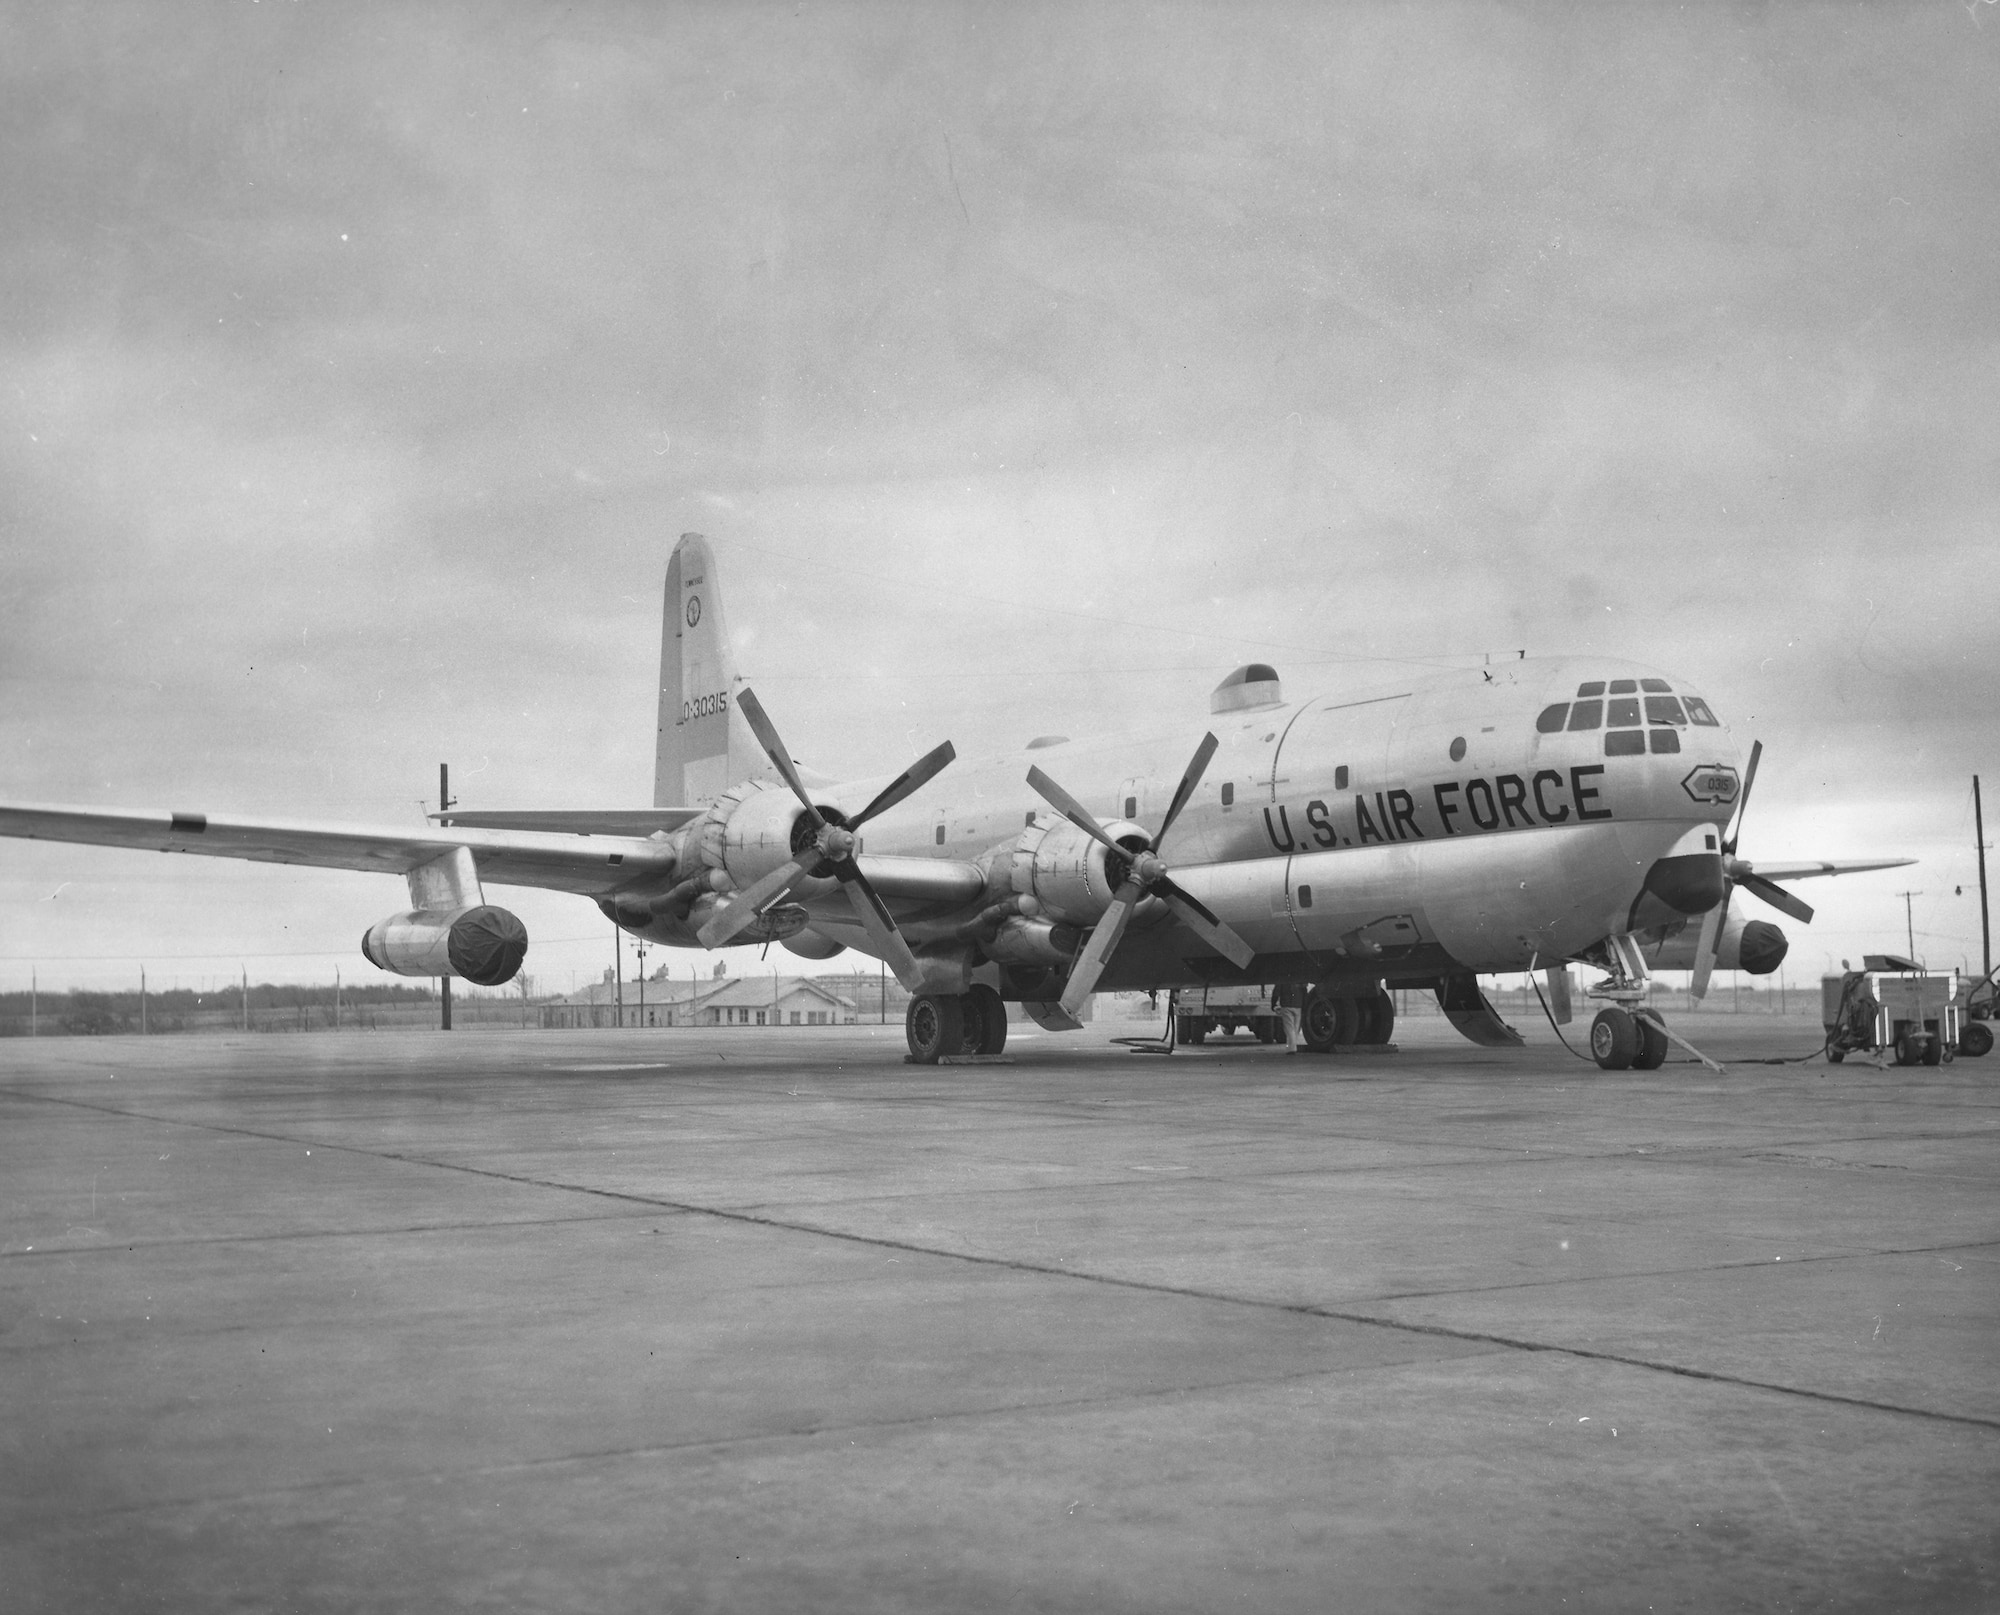 C-97 at Tinker Air Force Base in the 1950s. (Courtesy photo)